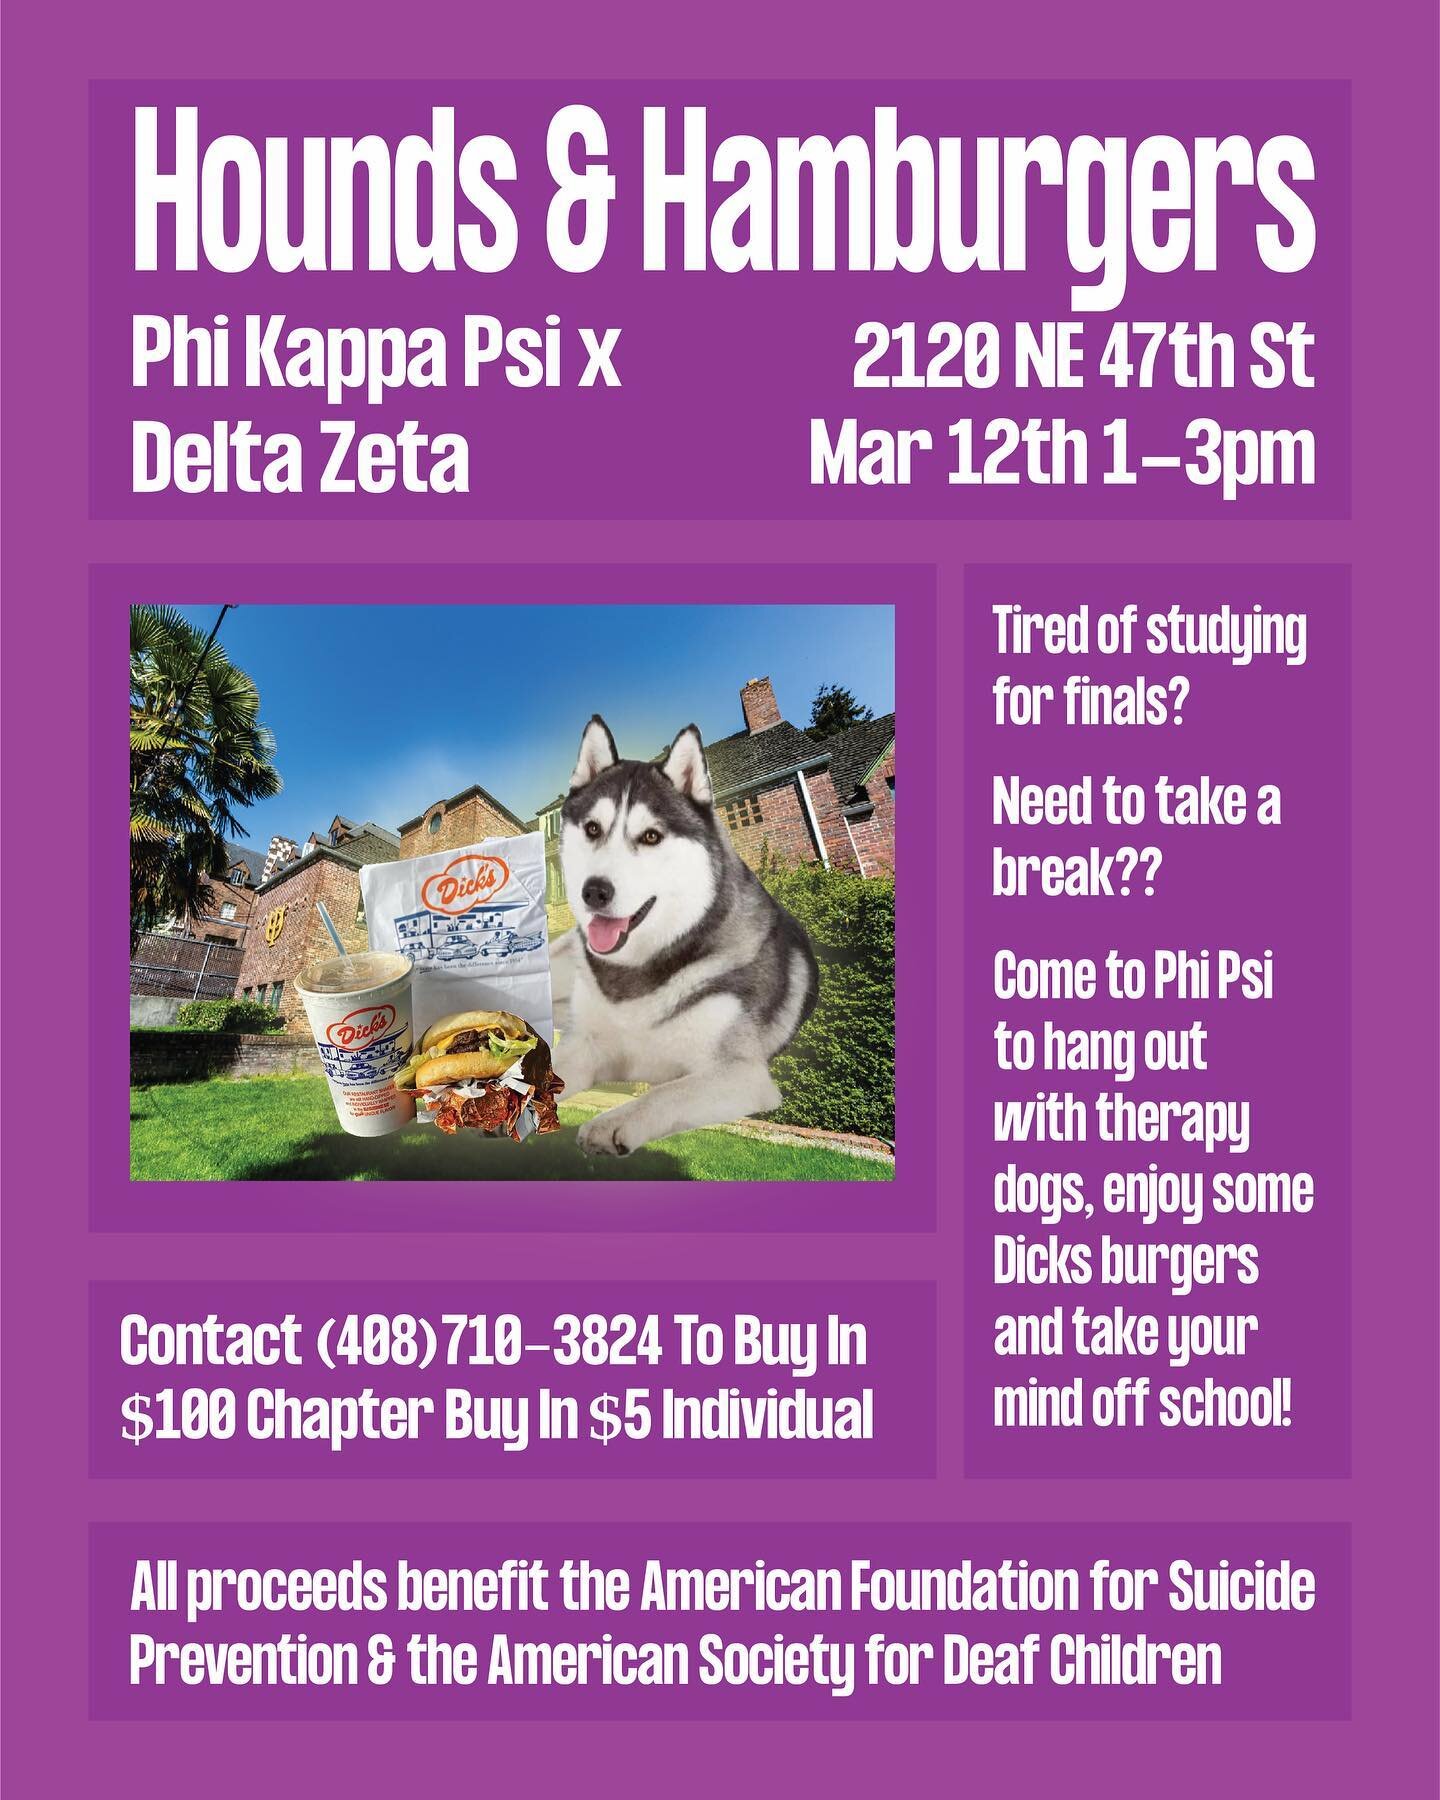 Introducing Hounds &amp; Hamburgers by
Phi Kappa Psi and Delta Zeta!

We will be having therapy dogs and Dicks burgers to help relieve finals stress on 
Saturday, March 12th from 1-3PM.

All proceeds will go to American Foundation for Suicide Prevent